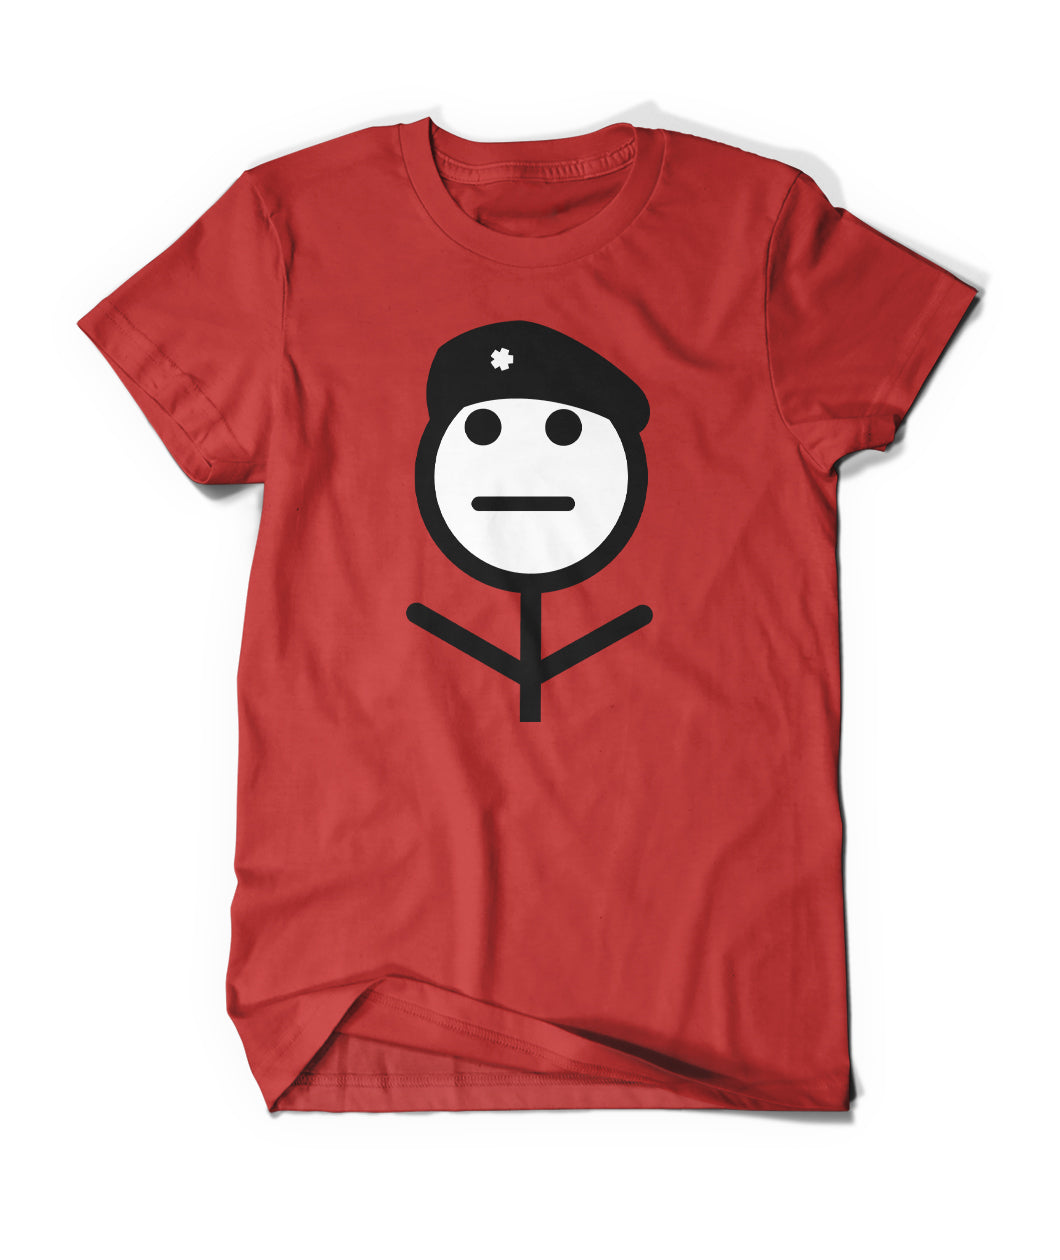 A red t-shirt with a stick figure drawing of Che Guevara - from CGP Grey.